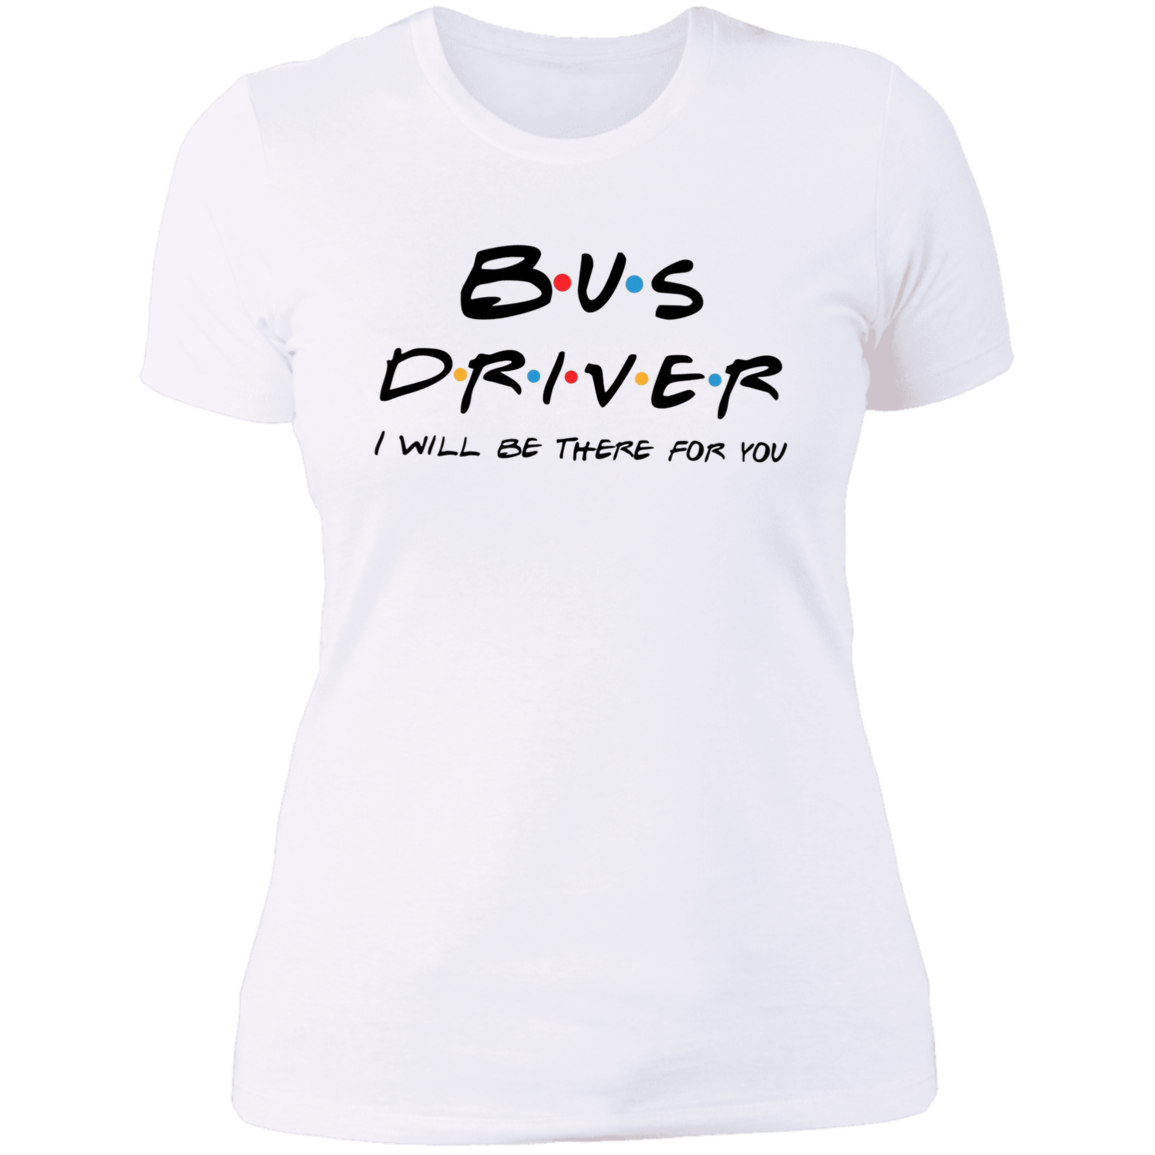 Women's Bus Driver I'll be there Tee